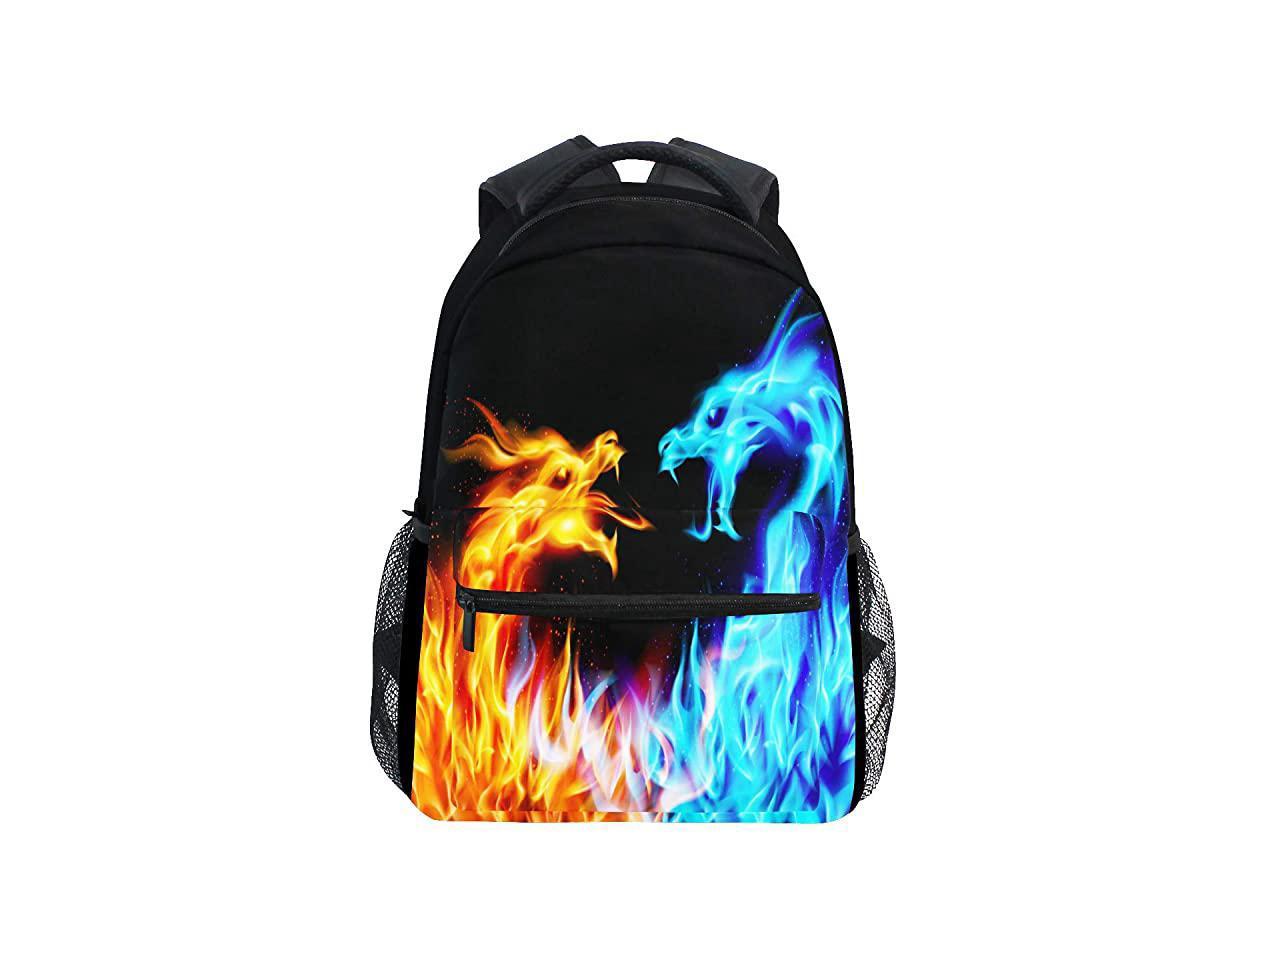 Animal Dragon Chinese Style Daypack Backpack School College Travel Hiking Fashion Laptop Backpack for Women Men Teen Casual Schoolbags Canvas